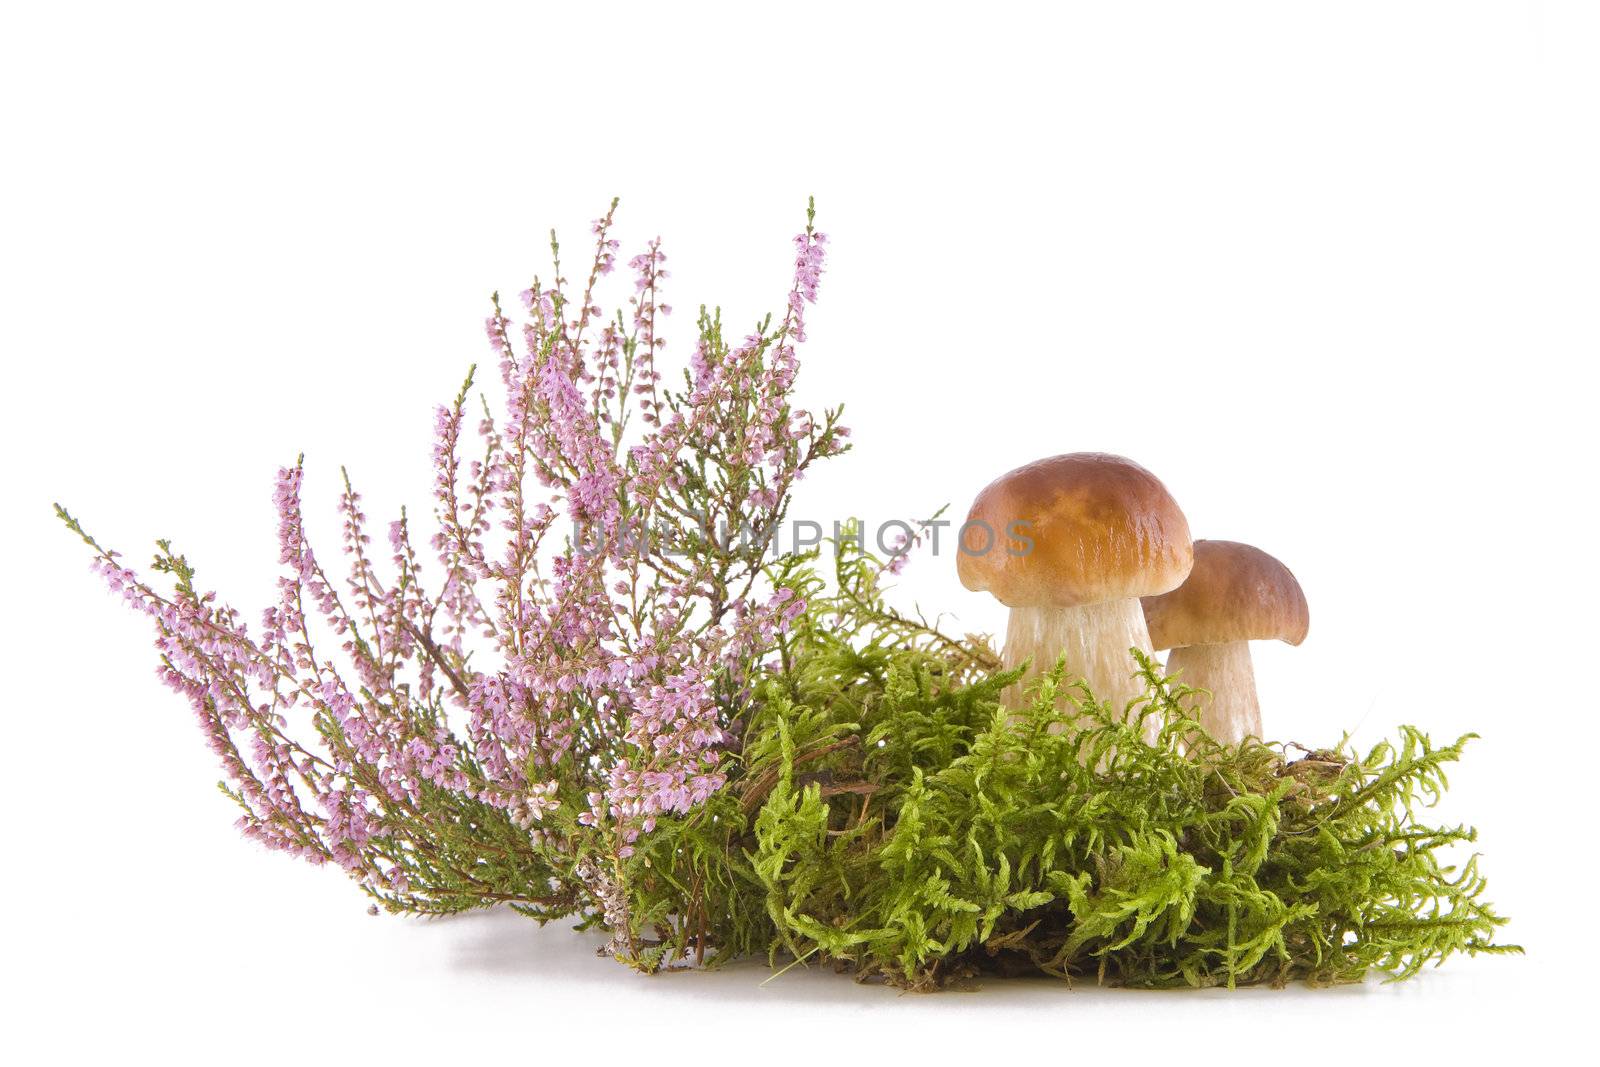 Two fresh porcini mushrooms in a green moss and heather isolated on white background